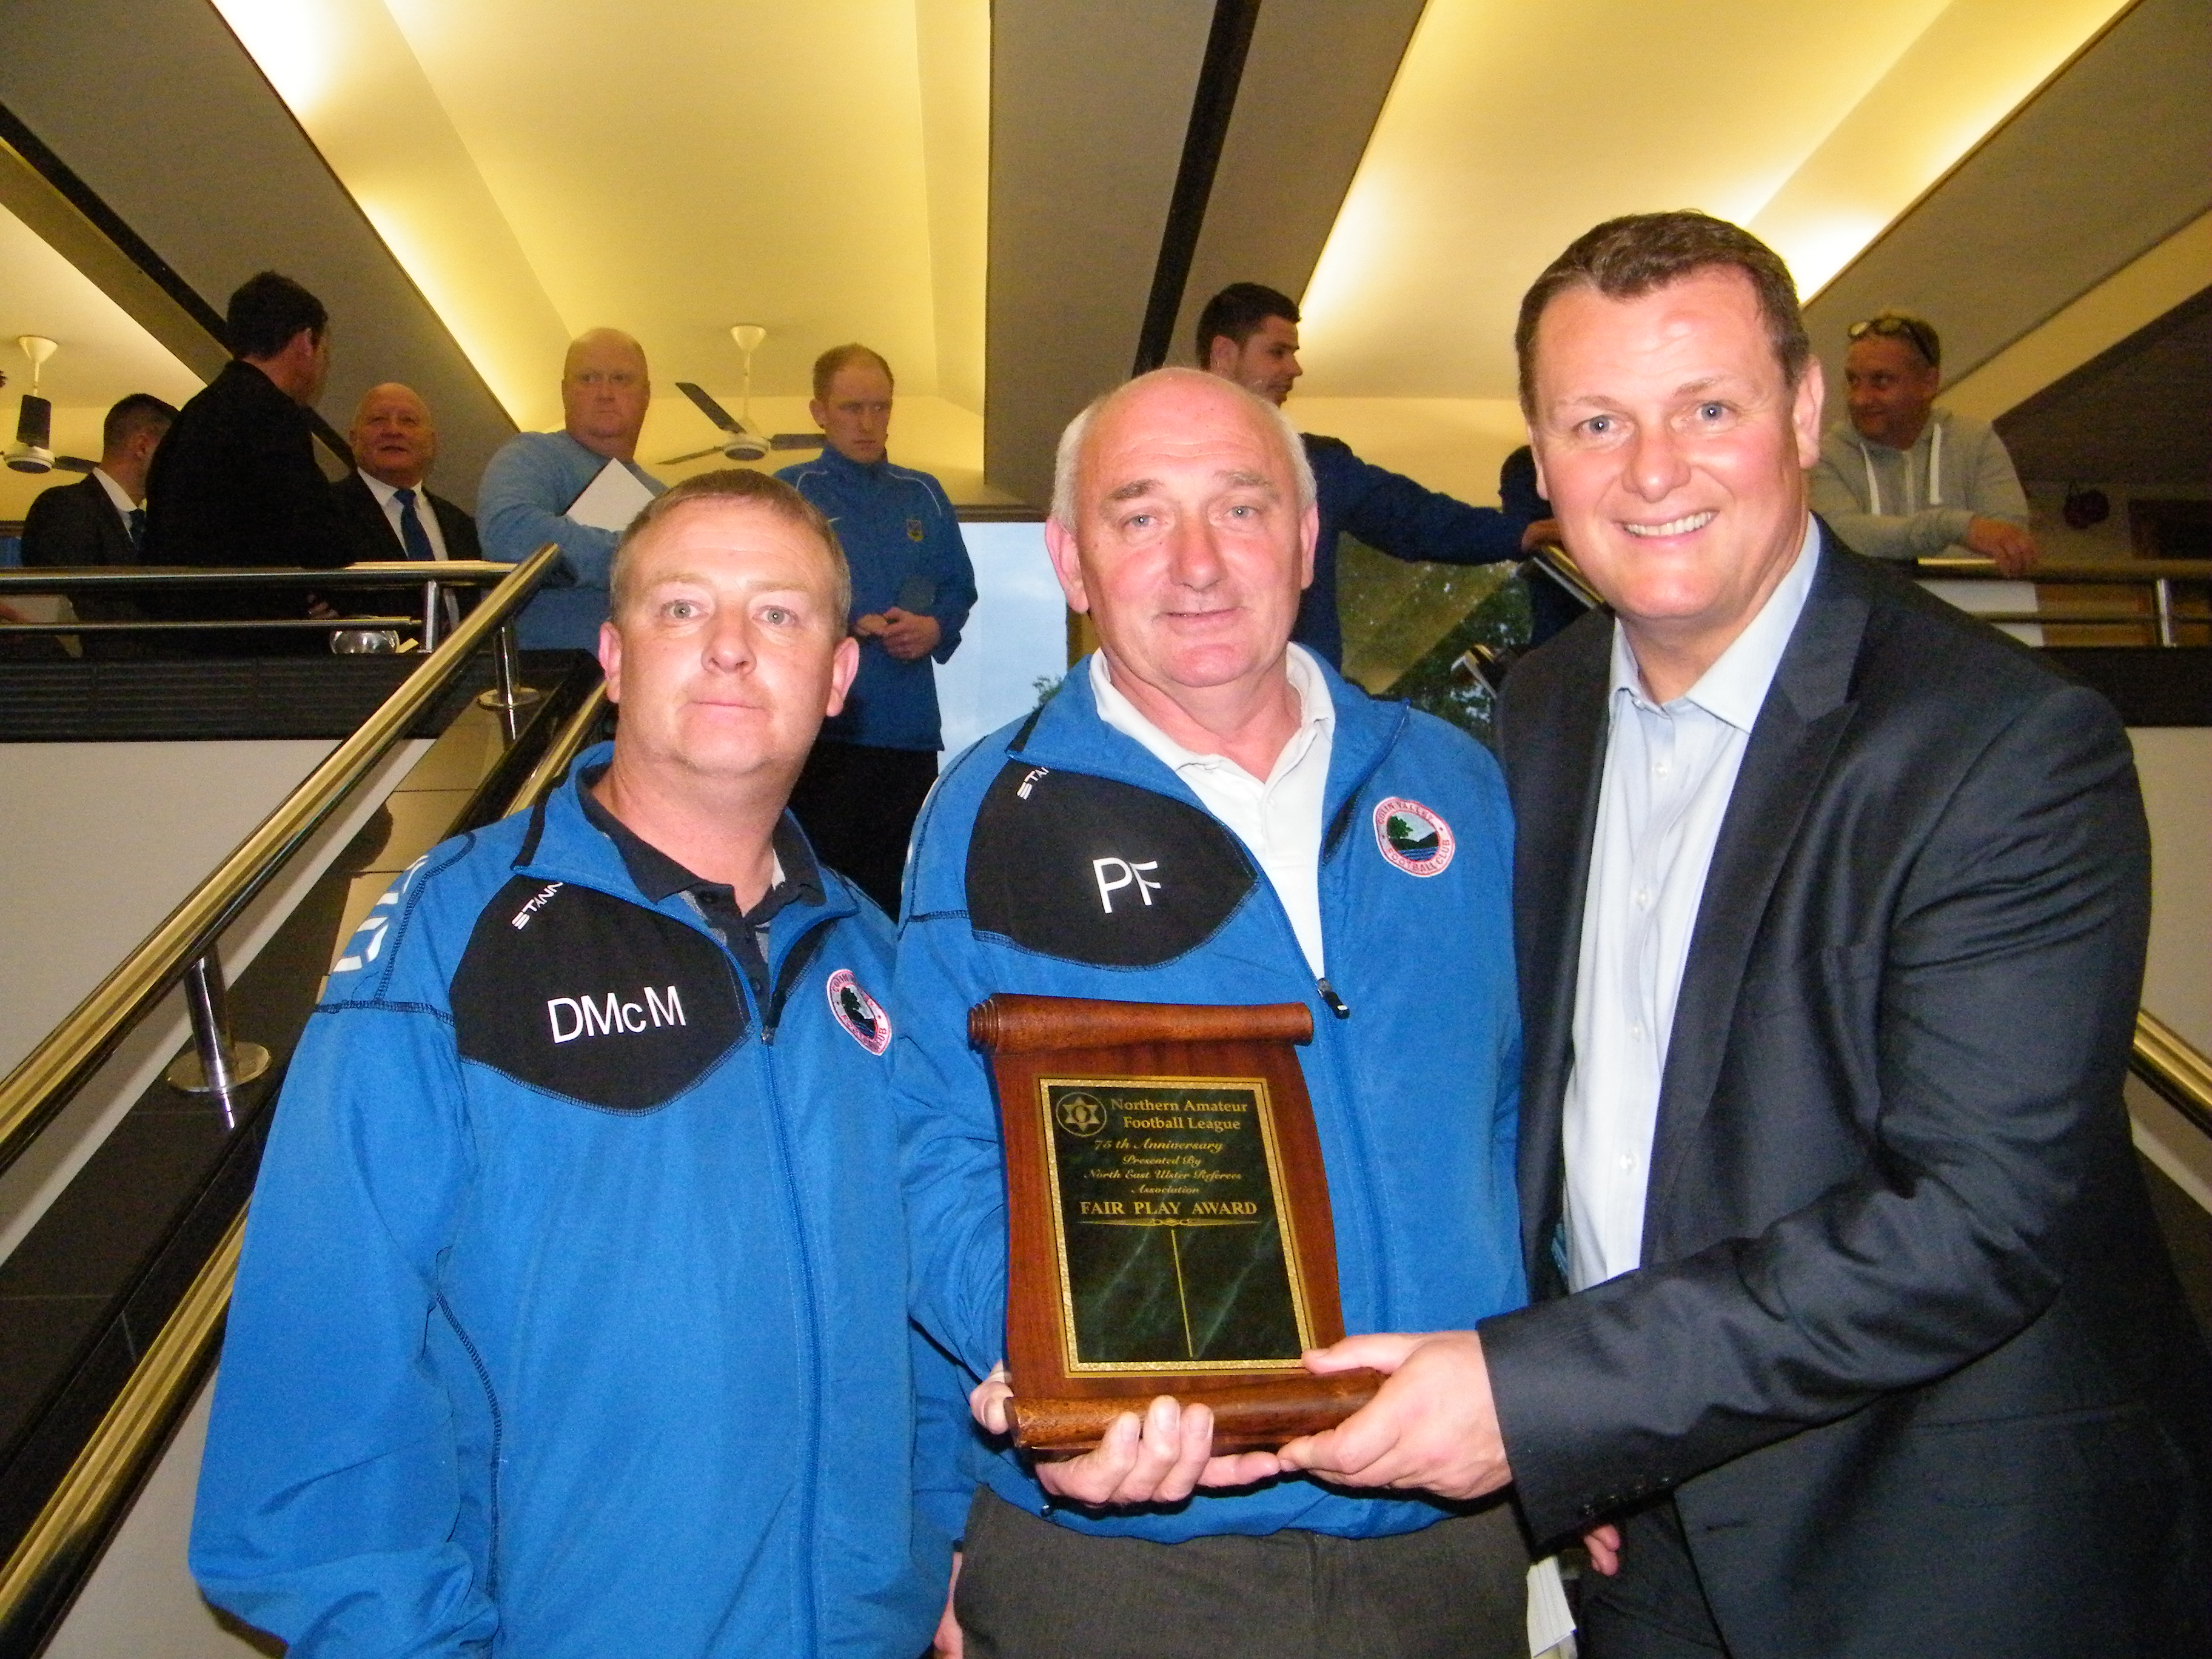 Colinvalley FC Paddy Fay & Danny McMullan receiving the Fair Play award from Jim Magilton